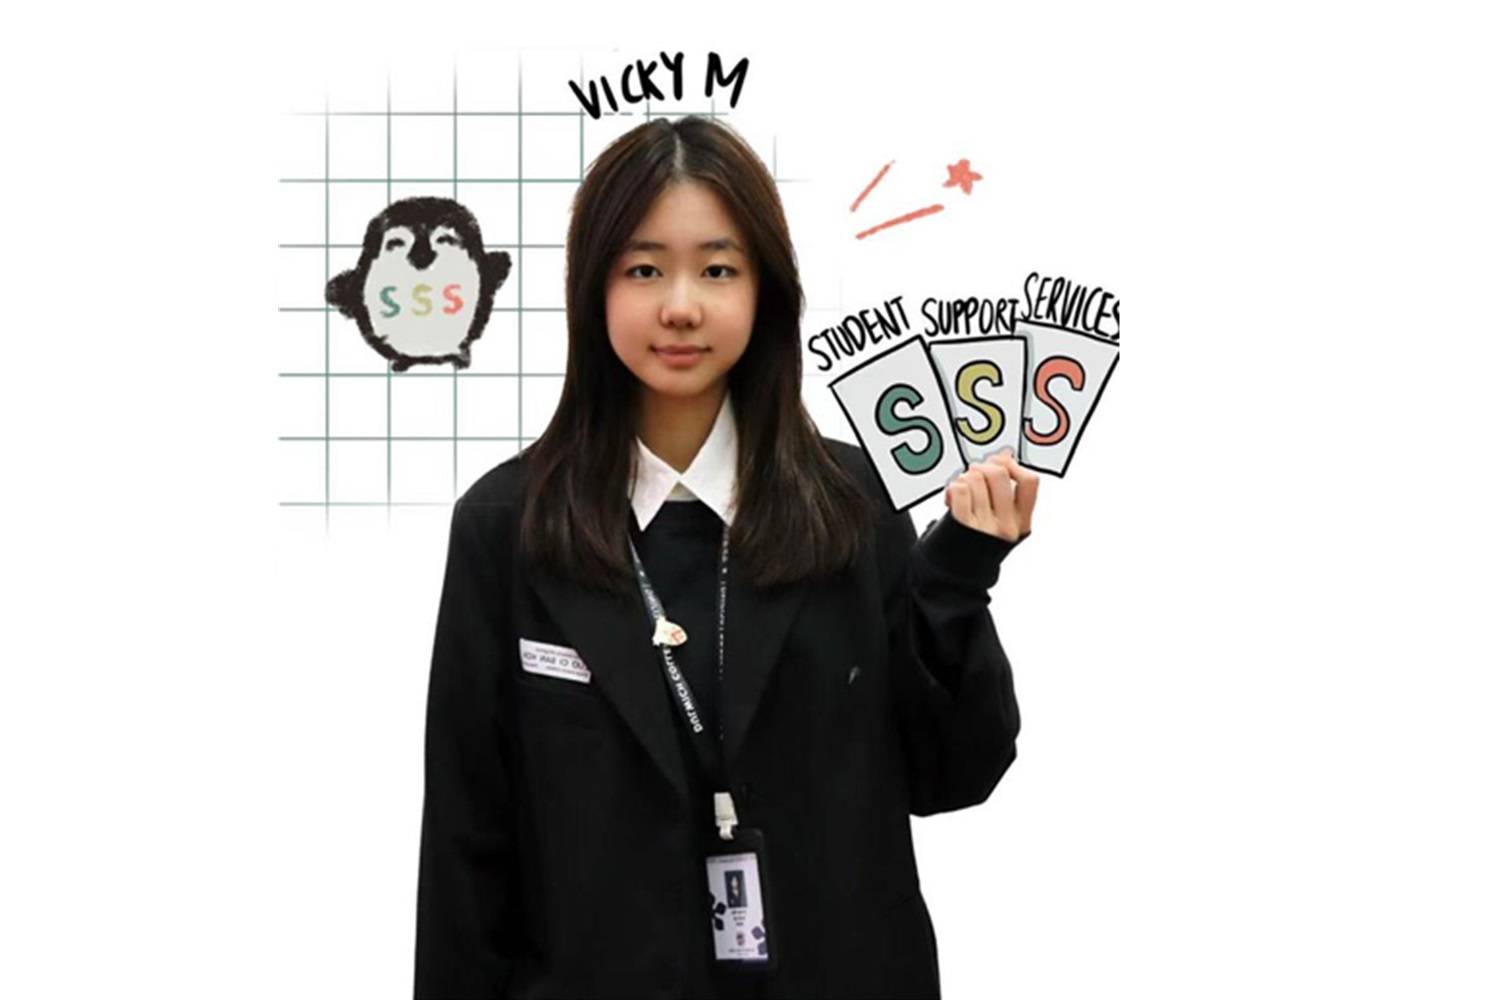 Student Support Service Prefects: Vicky M